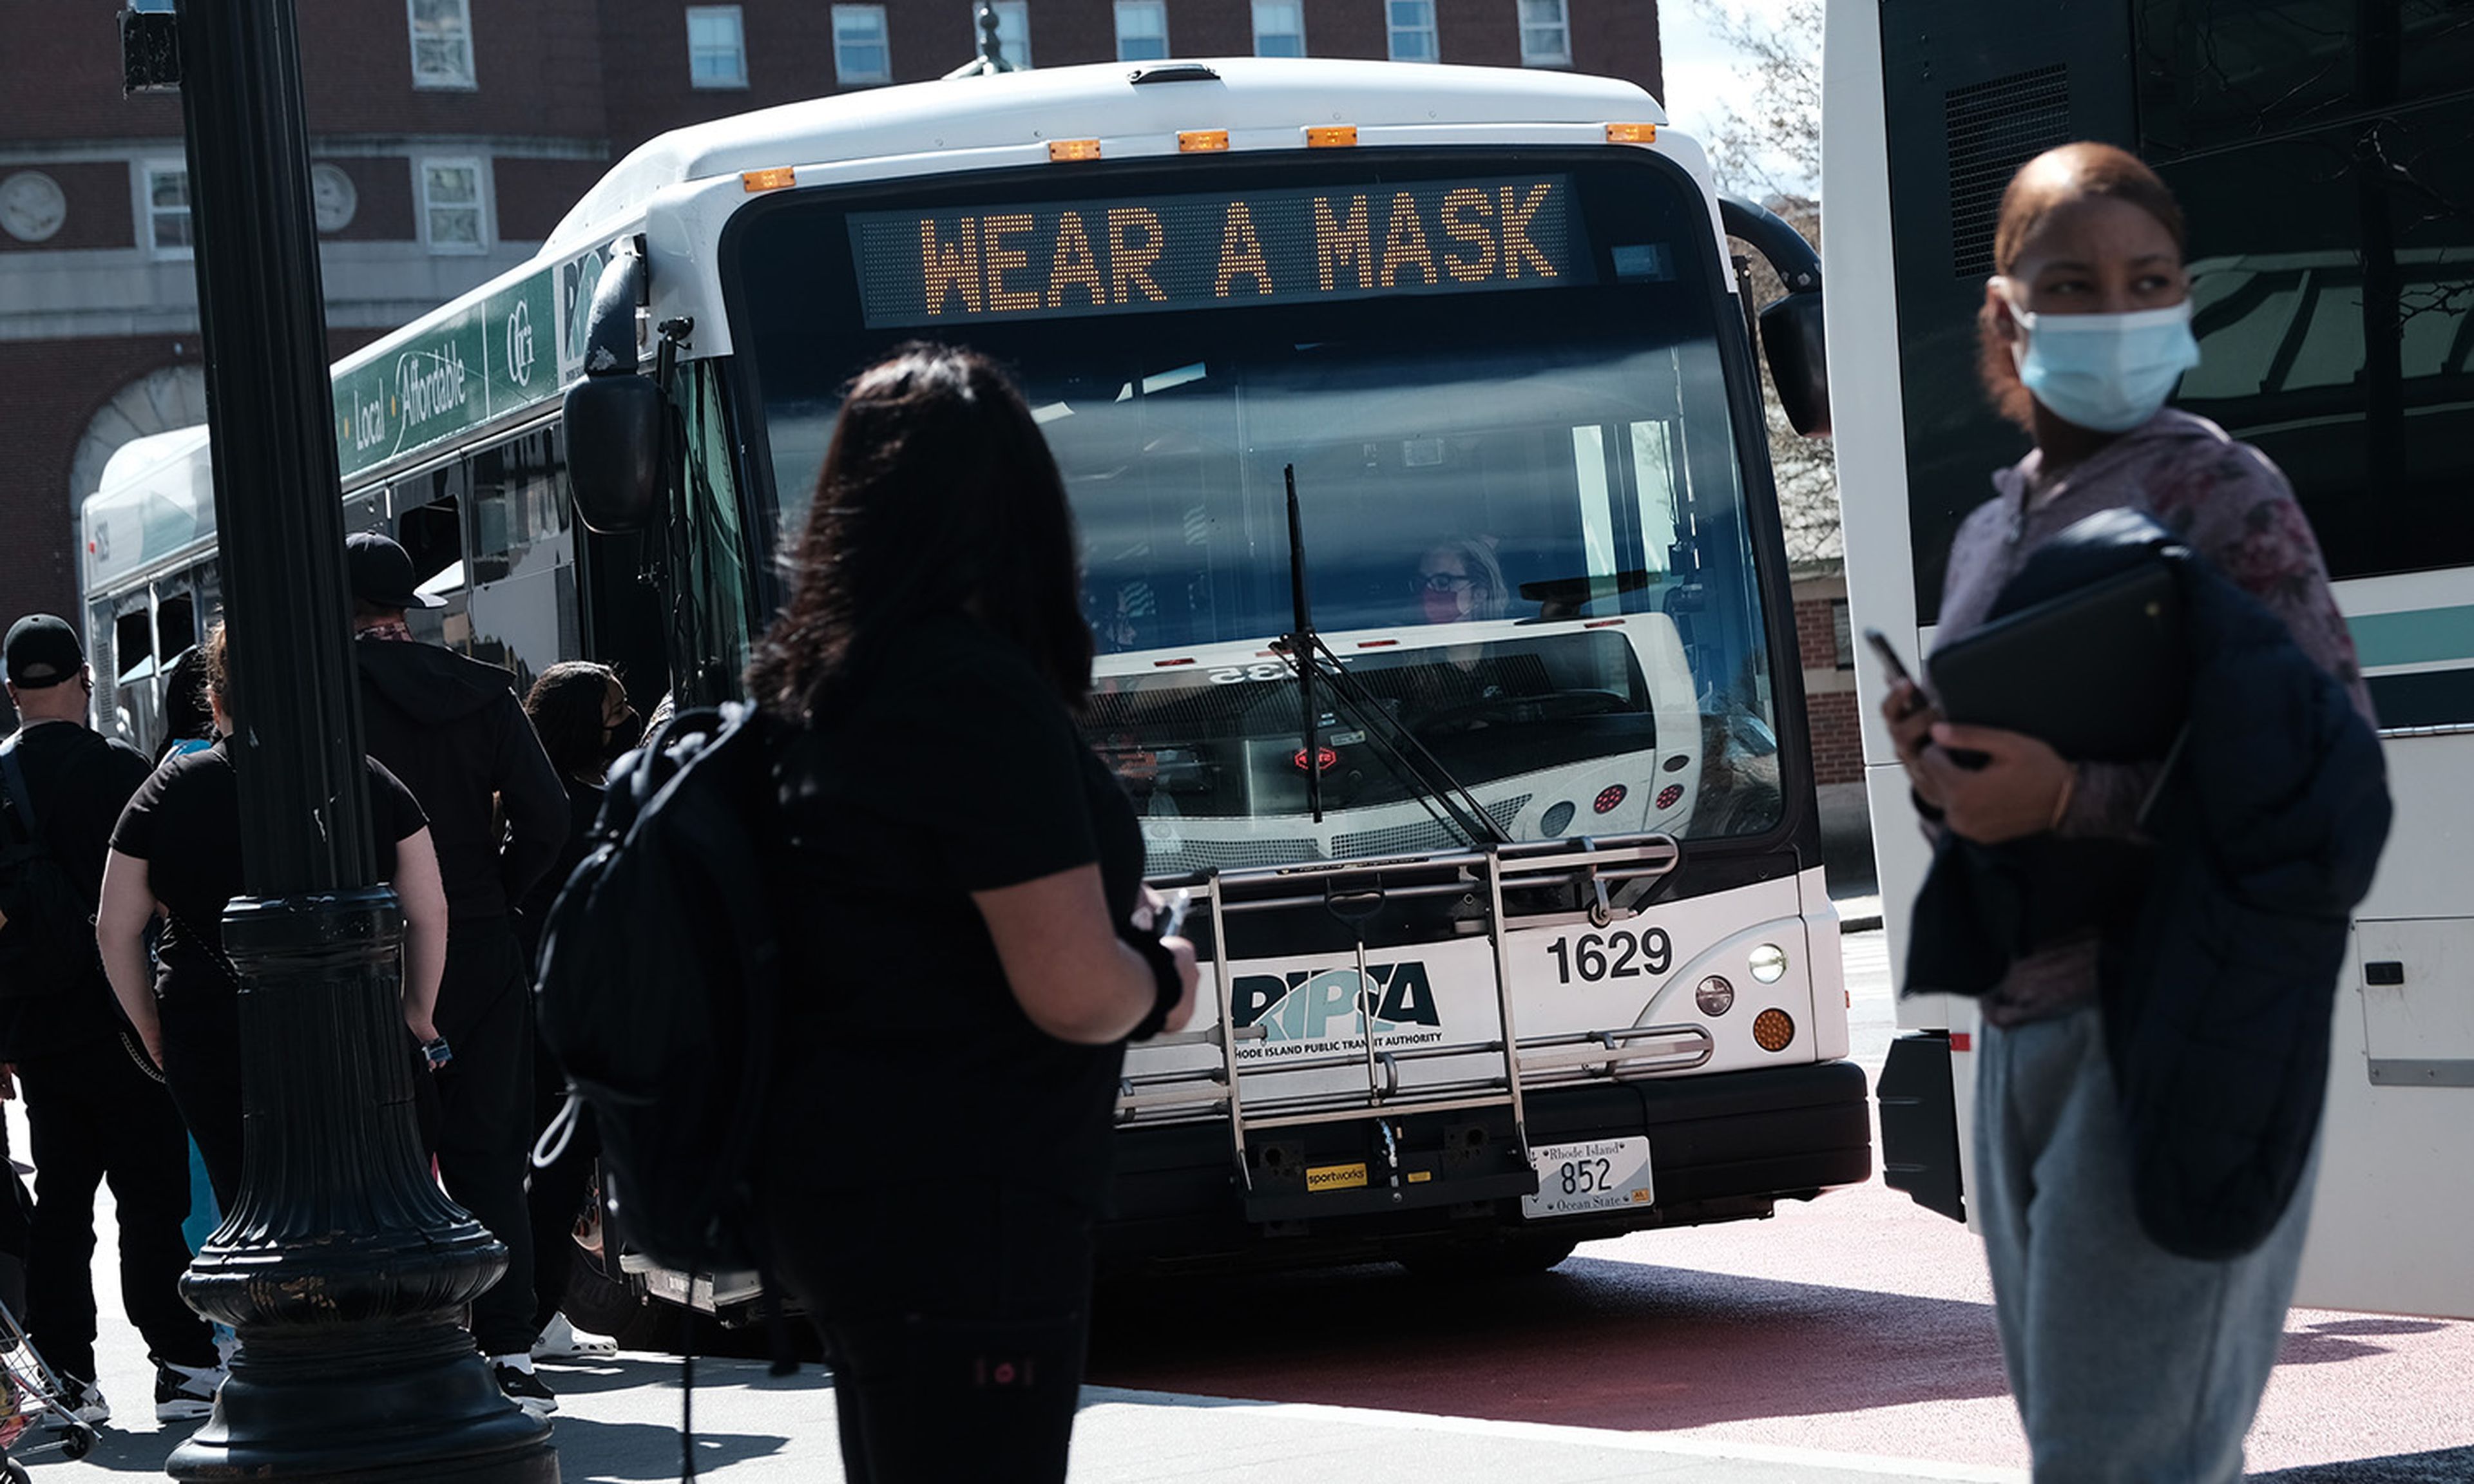 People wait at a bus stop on April 8, 2021, in Providence, R.I. An ongoing investigation into the public transit authority reveals new details, including that its former health plan administrator has been added to the review. (Photo by Spencer Platt/Getty Images)